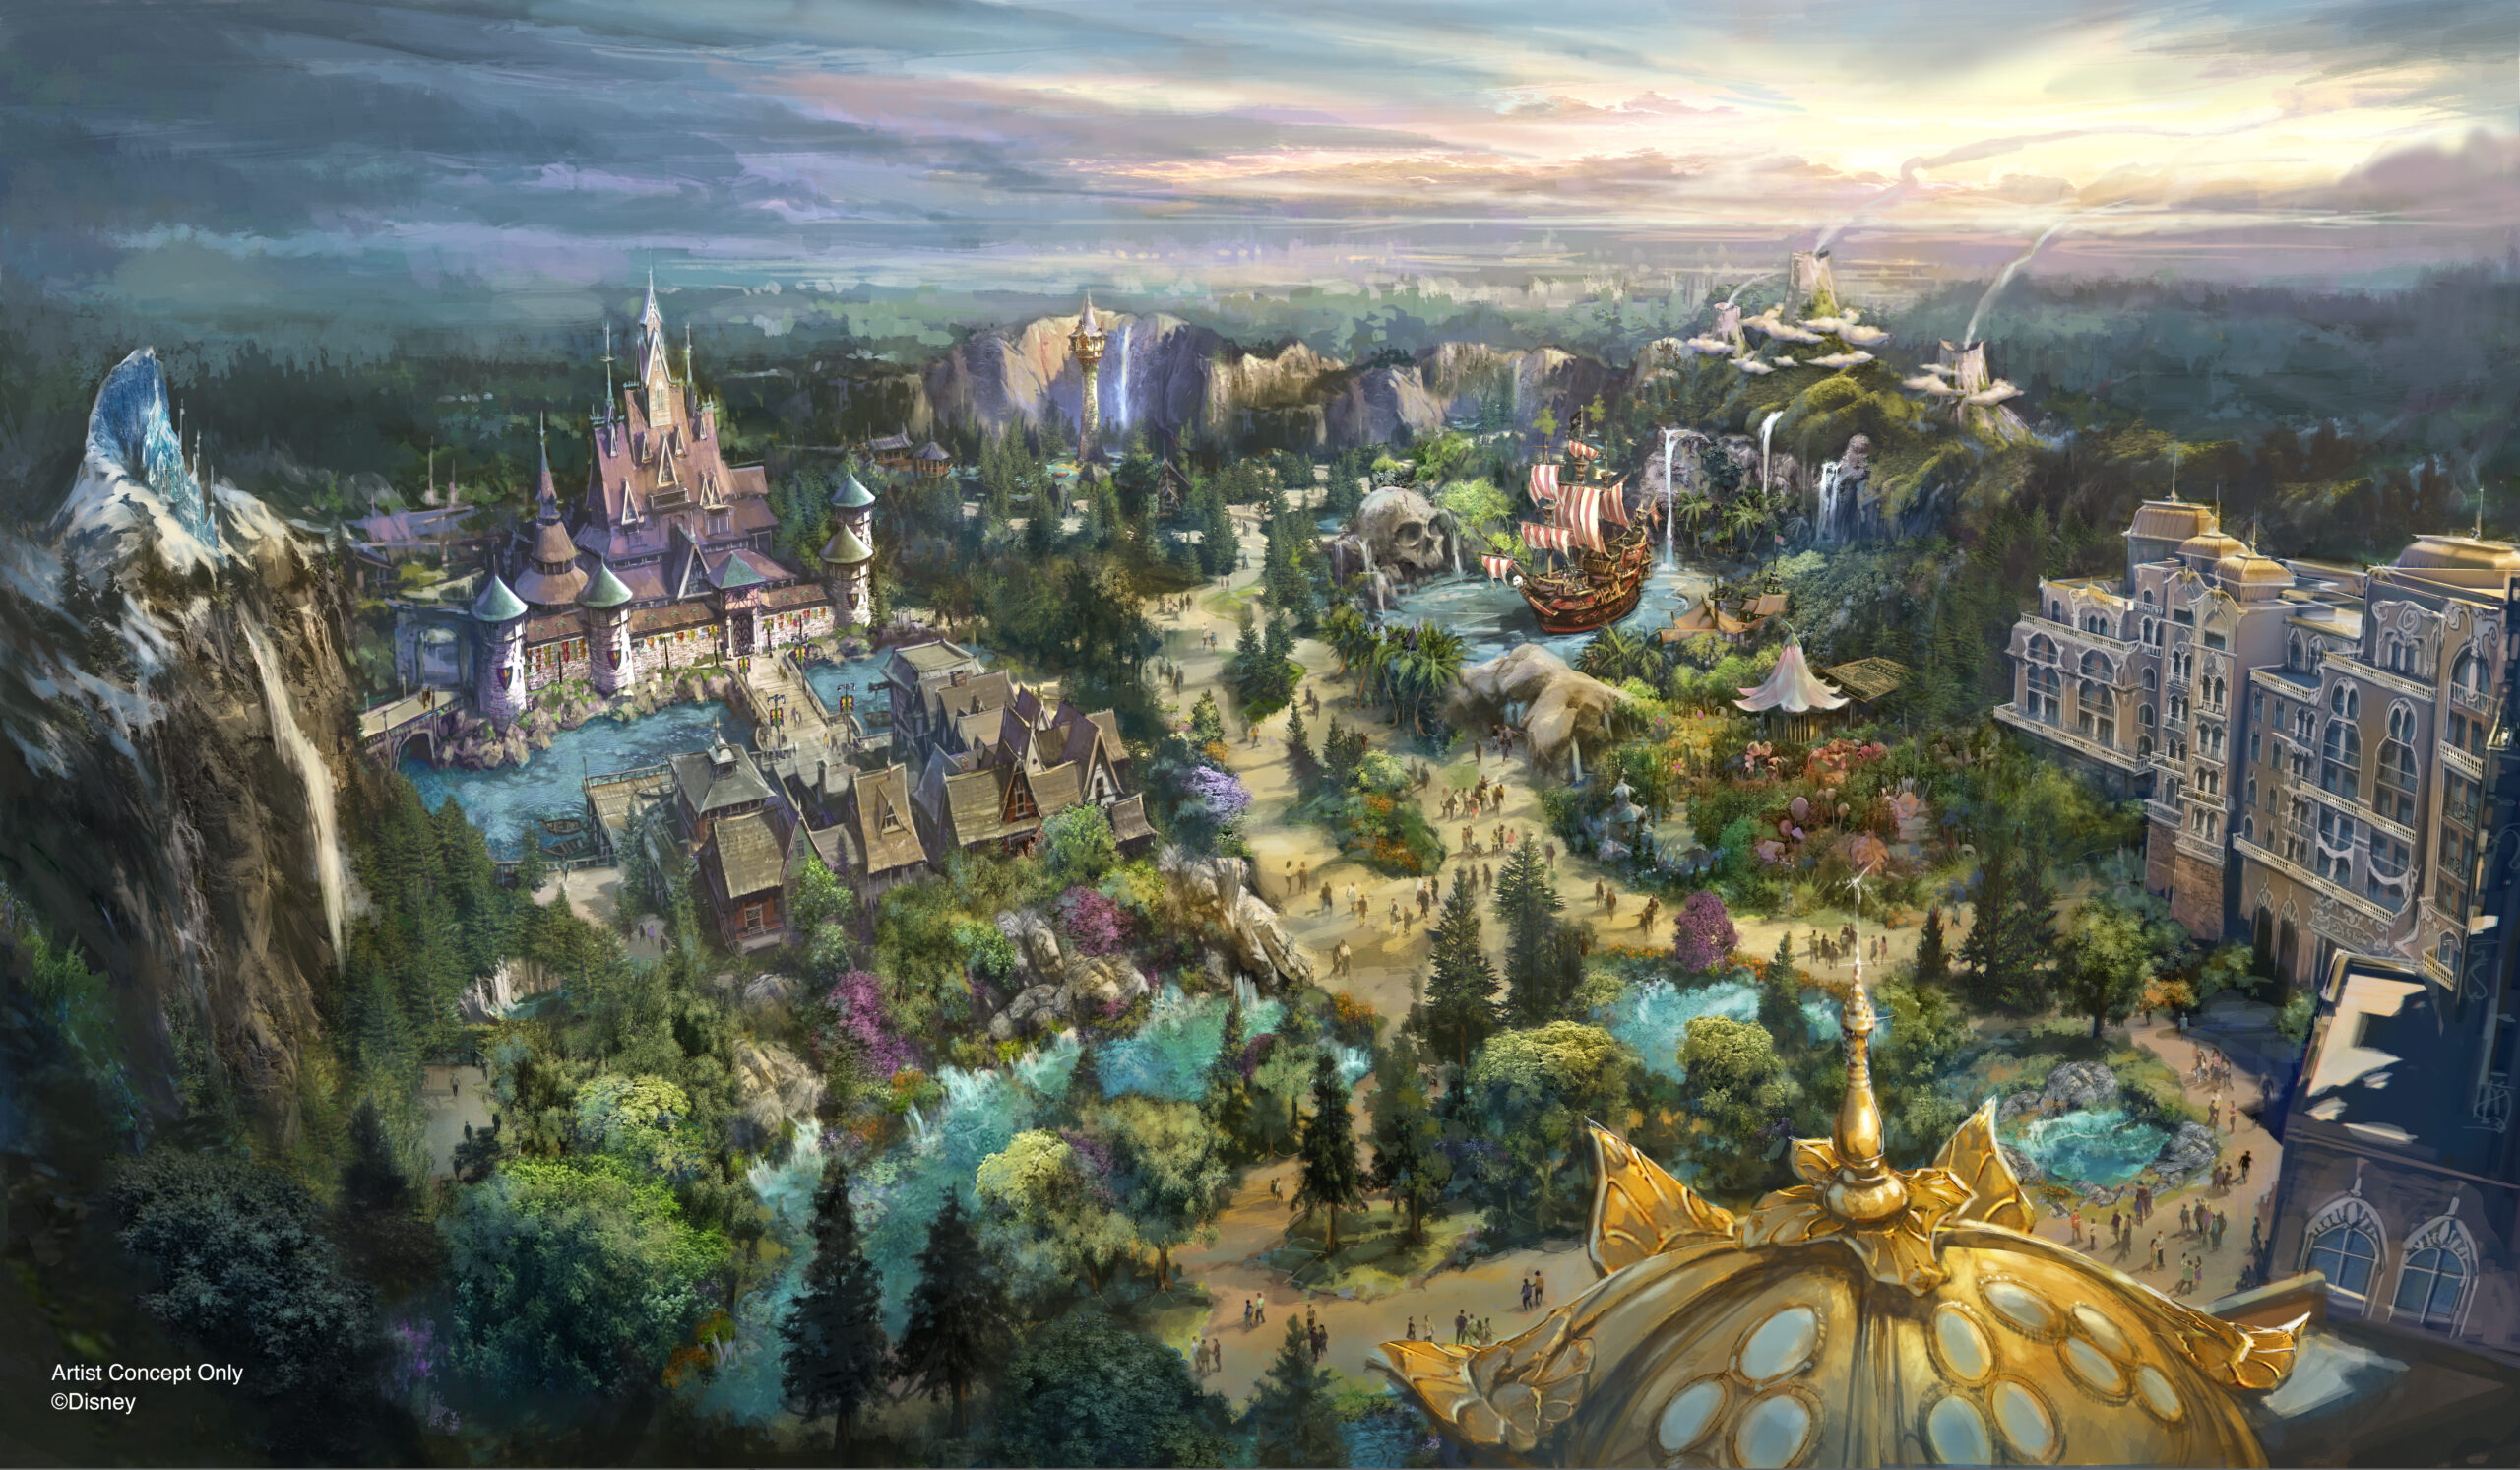 A new look at what’s coming to Fantasy Springs at Tokyo Disney Resort is being shared! The eighth themed port of Tokyo DisneySea will feature Rapunzel’s Forest, Peter Pan’s Never Land and Frozen Kingdom – all inspired by the Walt Disney Animation Studios Films.